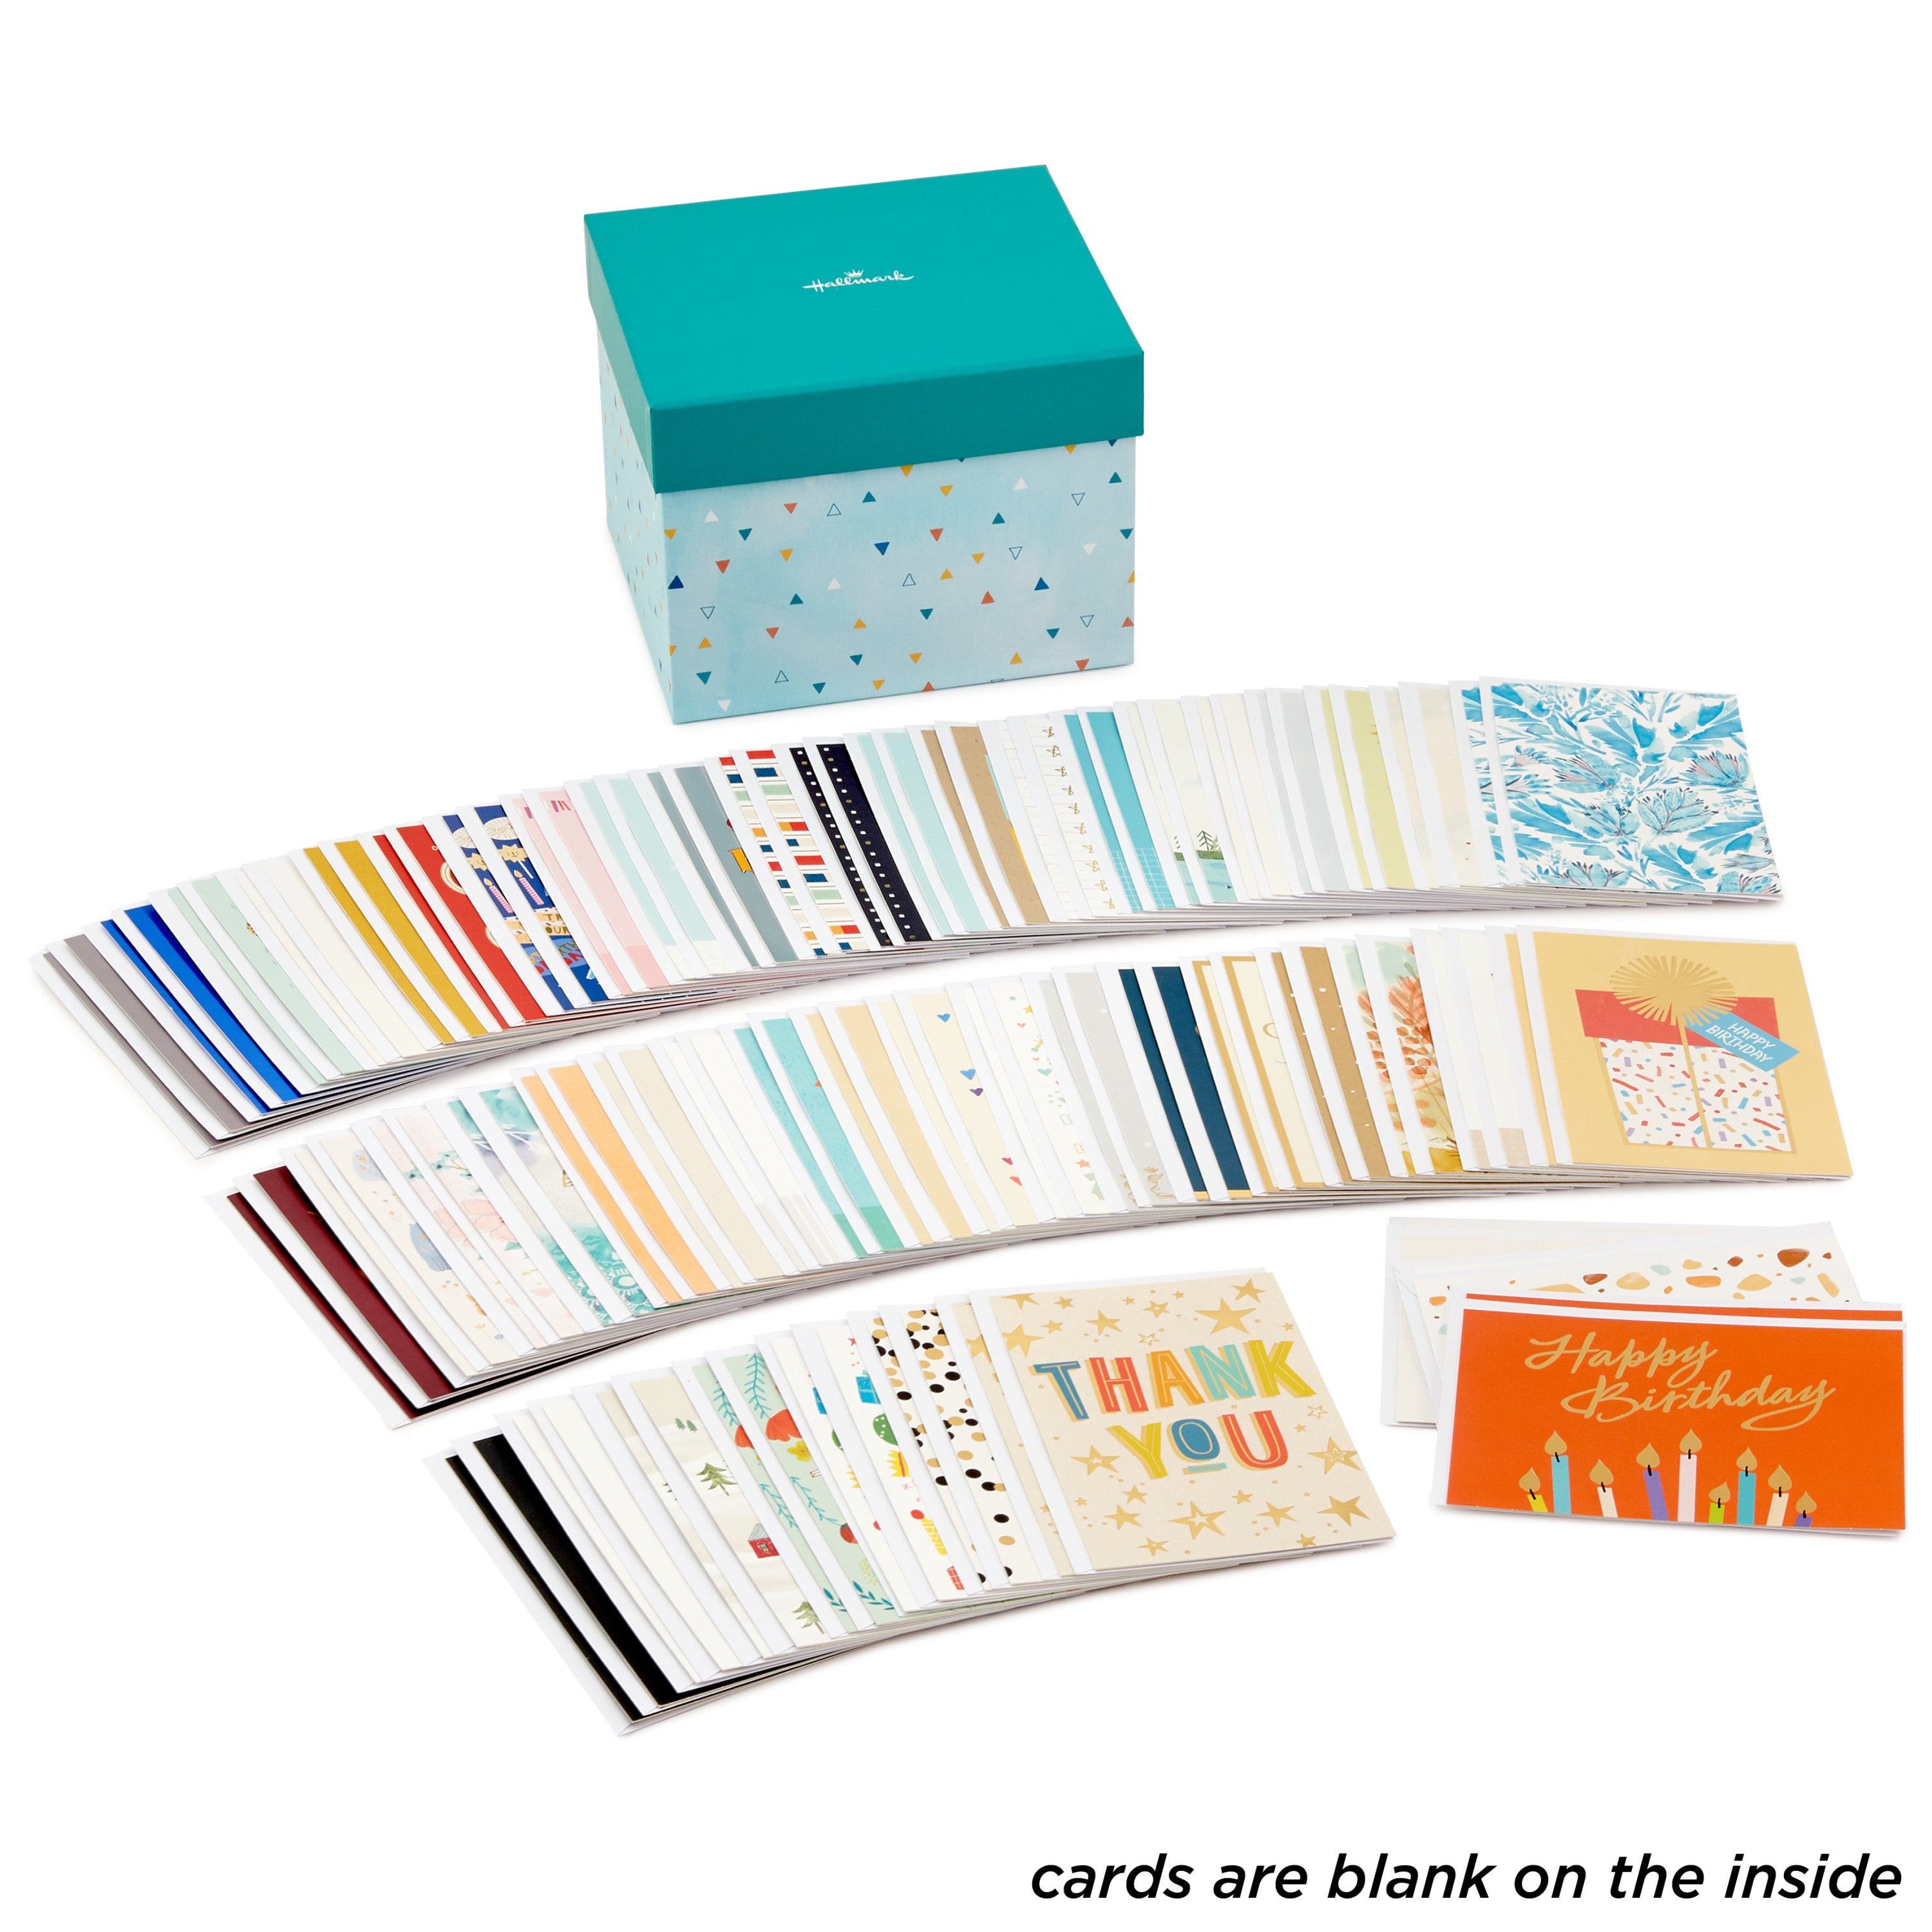 All Occasion Boxed Set of Assorted Blank Greeting Cards with Card Organizer (Pack of 100)—Birthday, Thank You, Congratulations, Wedding, Baby, Thinking of You, Sympathy